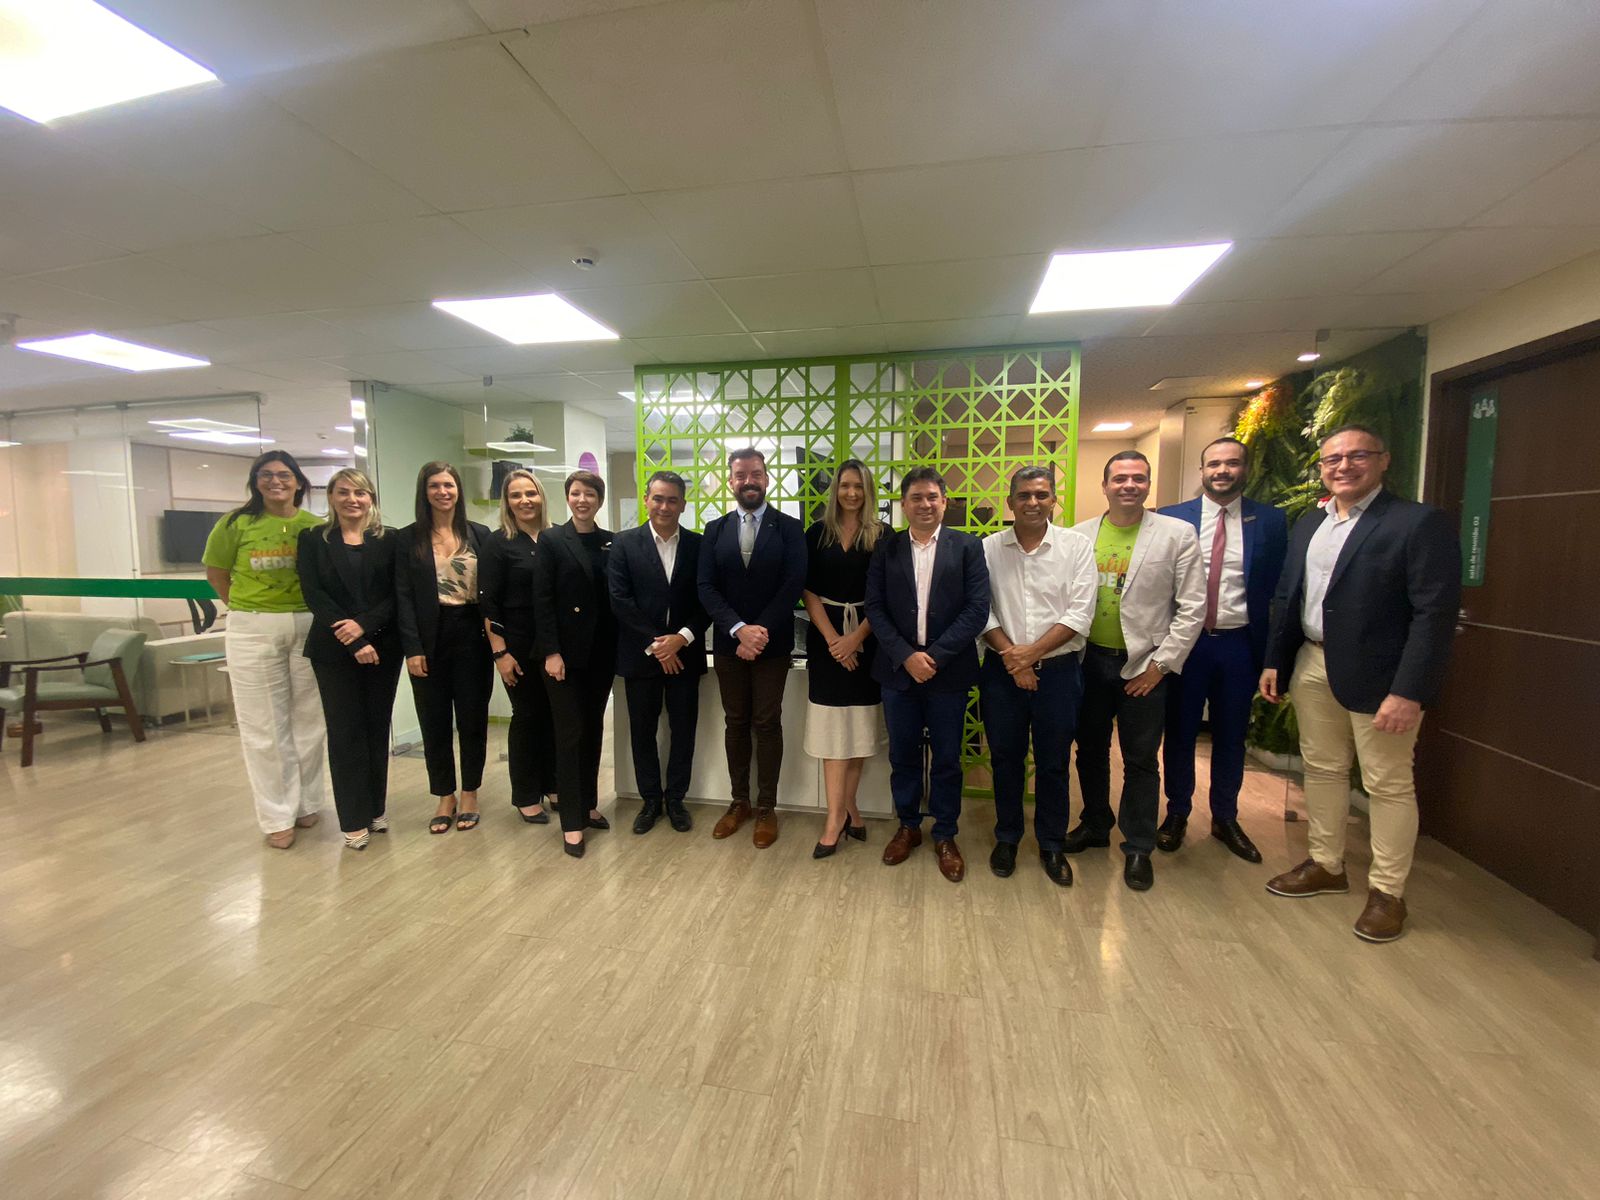 Unimed Fortaleza receives the Canadian consul and QGA evaluators for the first international accreditation follow-up visit – Portal IN – Pompeu Vasconcelos